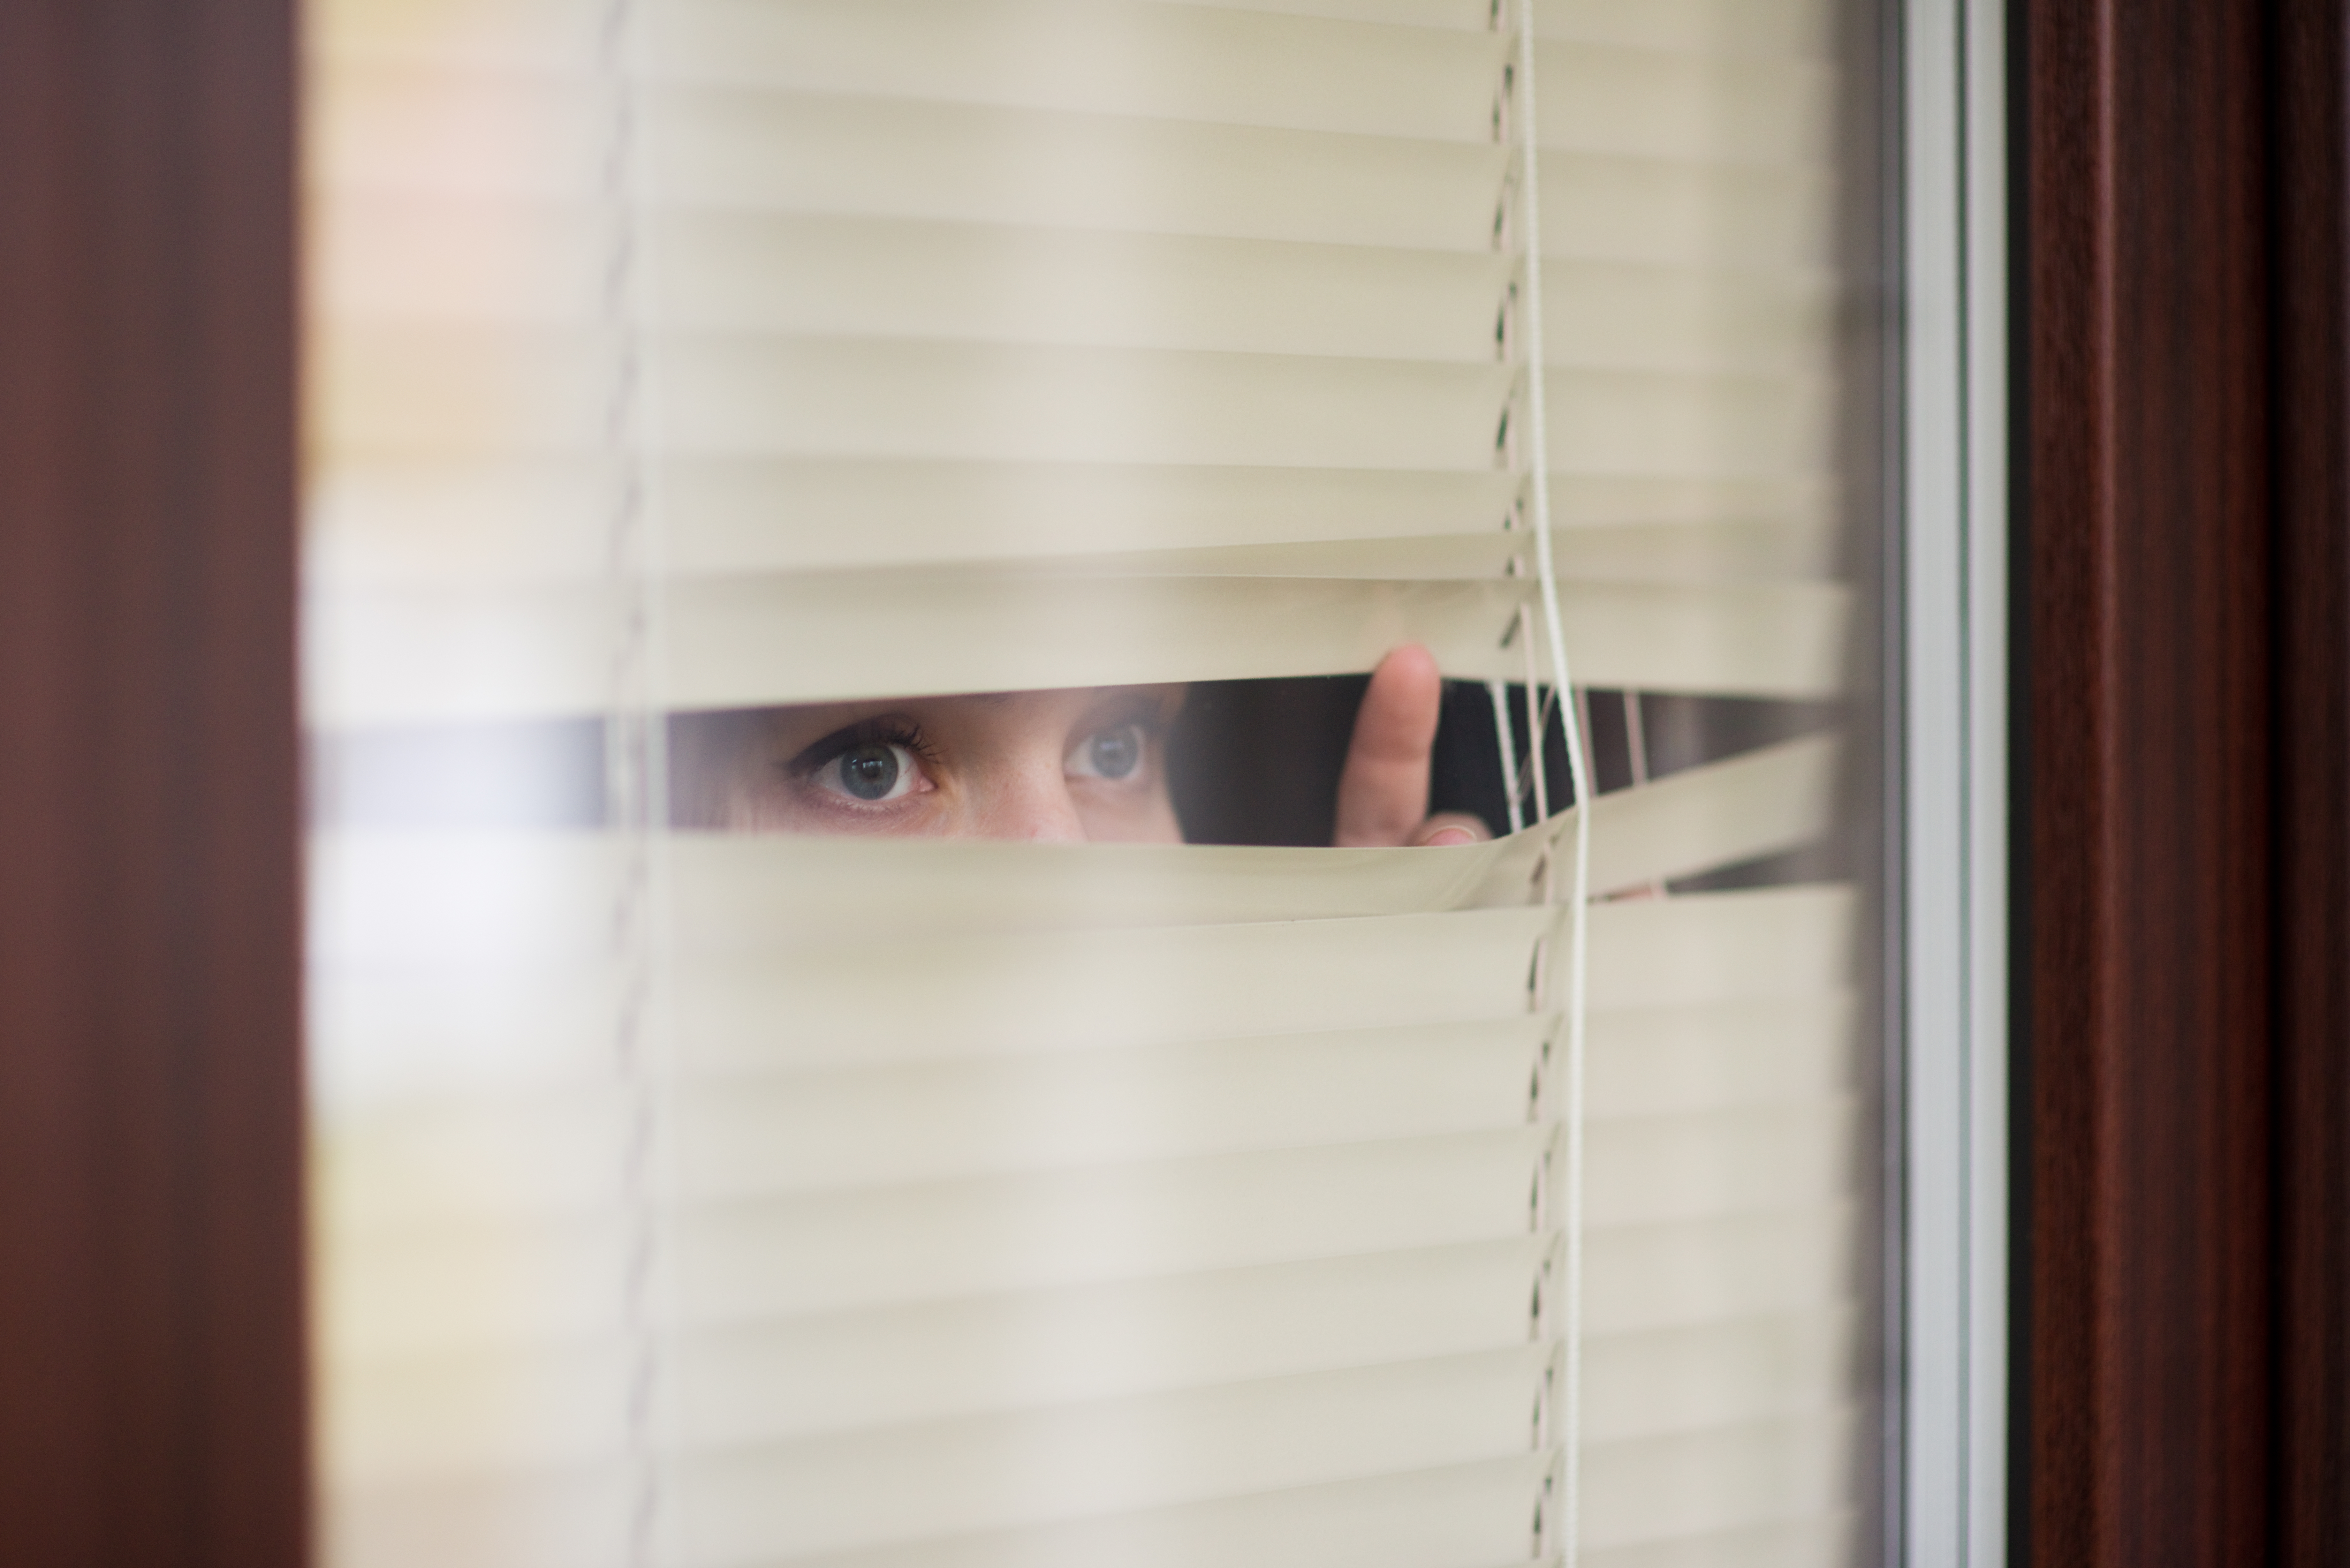 woman looking through window blinds into the street waiting, side view | Source: Shutterstock